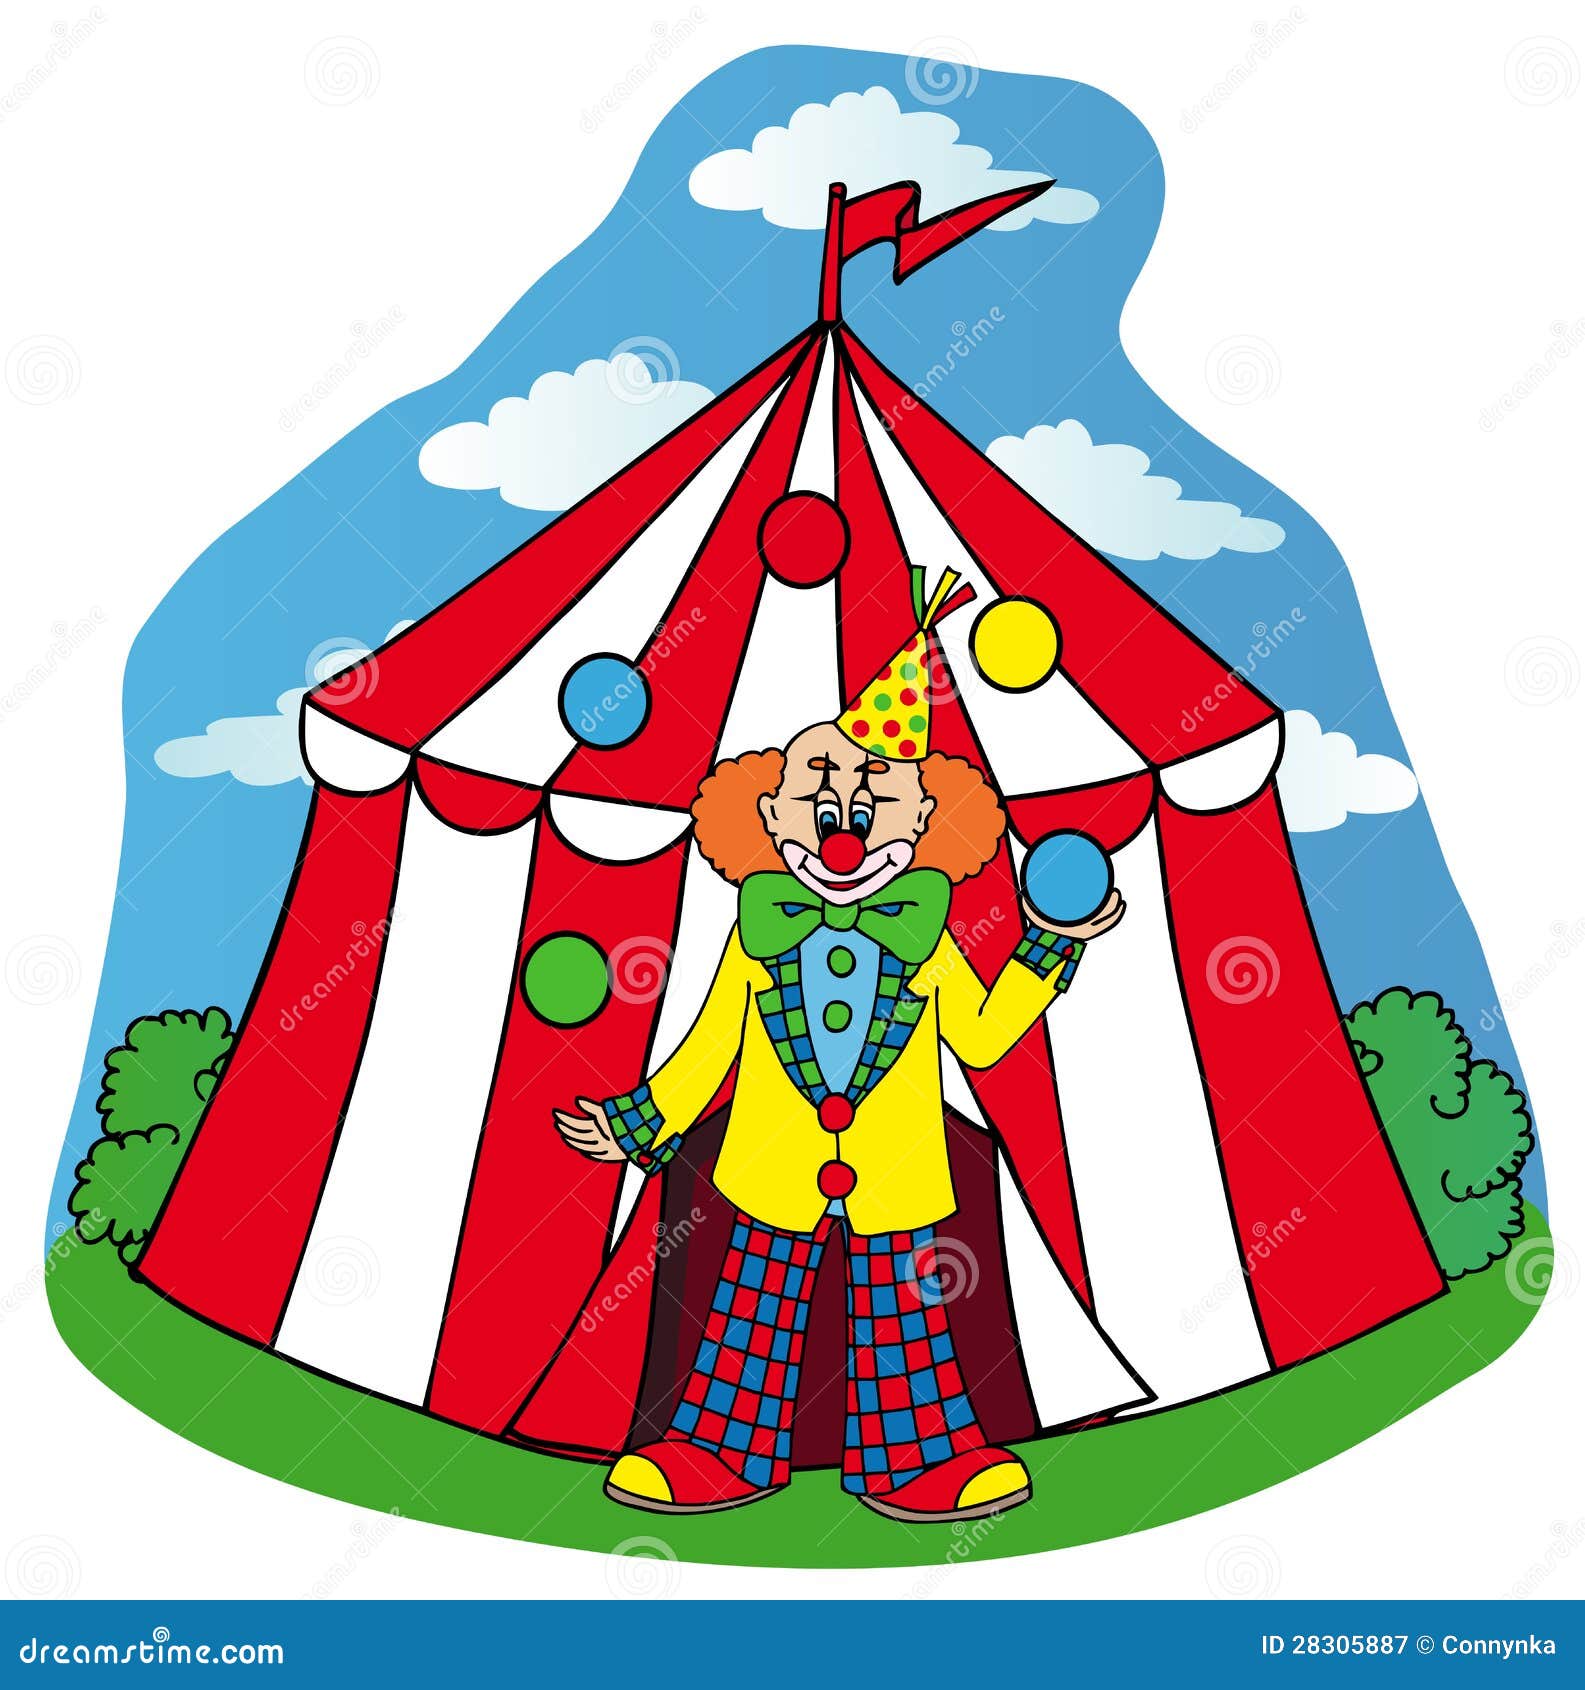 How to Draw a Clown with Circus for Kids Video  DrawingTutorials101com